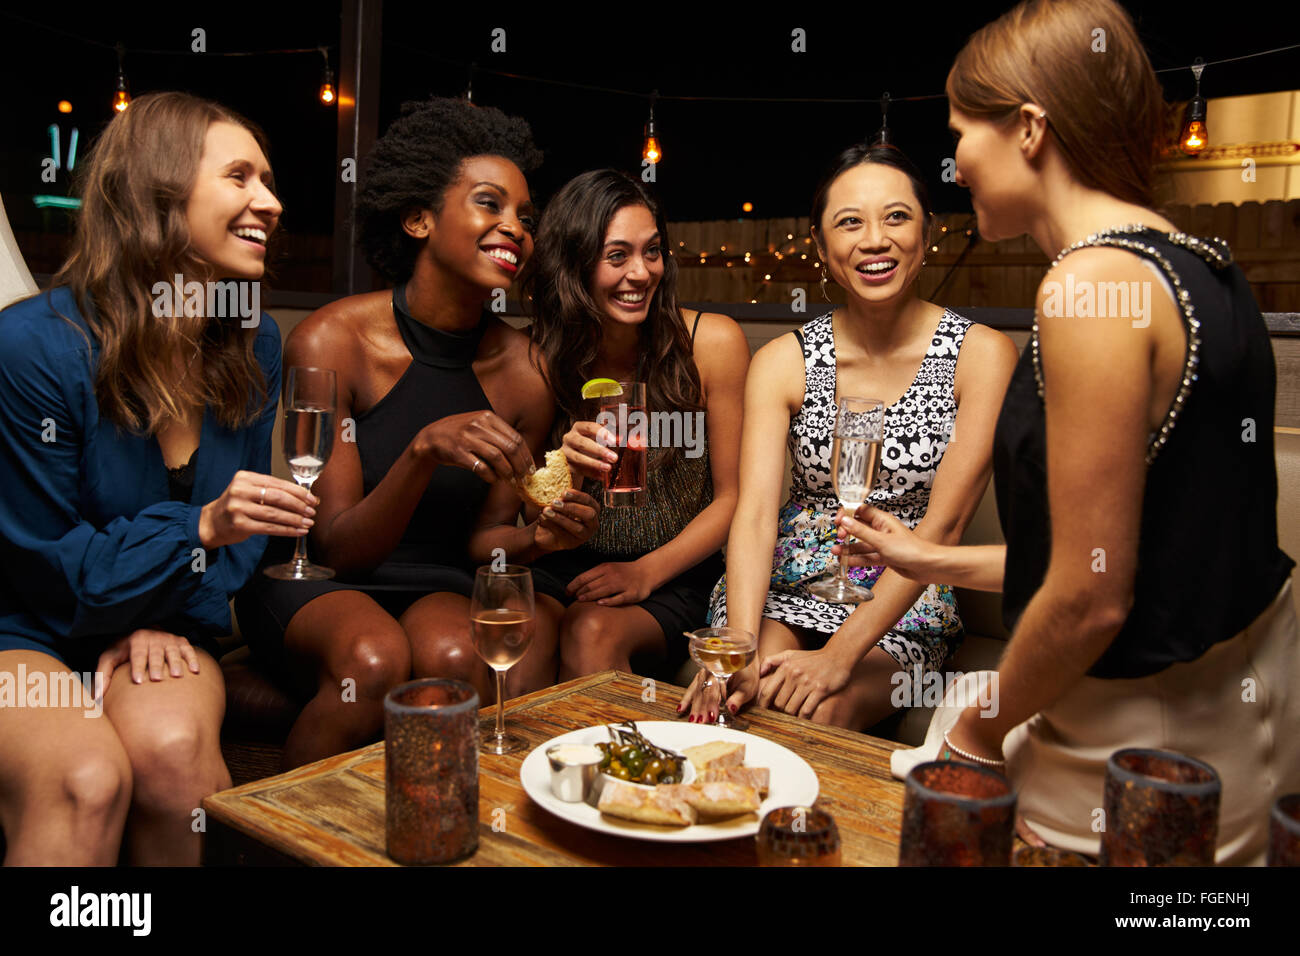 Group Of Female Friends Enjoying Night Out At Rooftop Bar Stock Photo ...